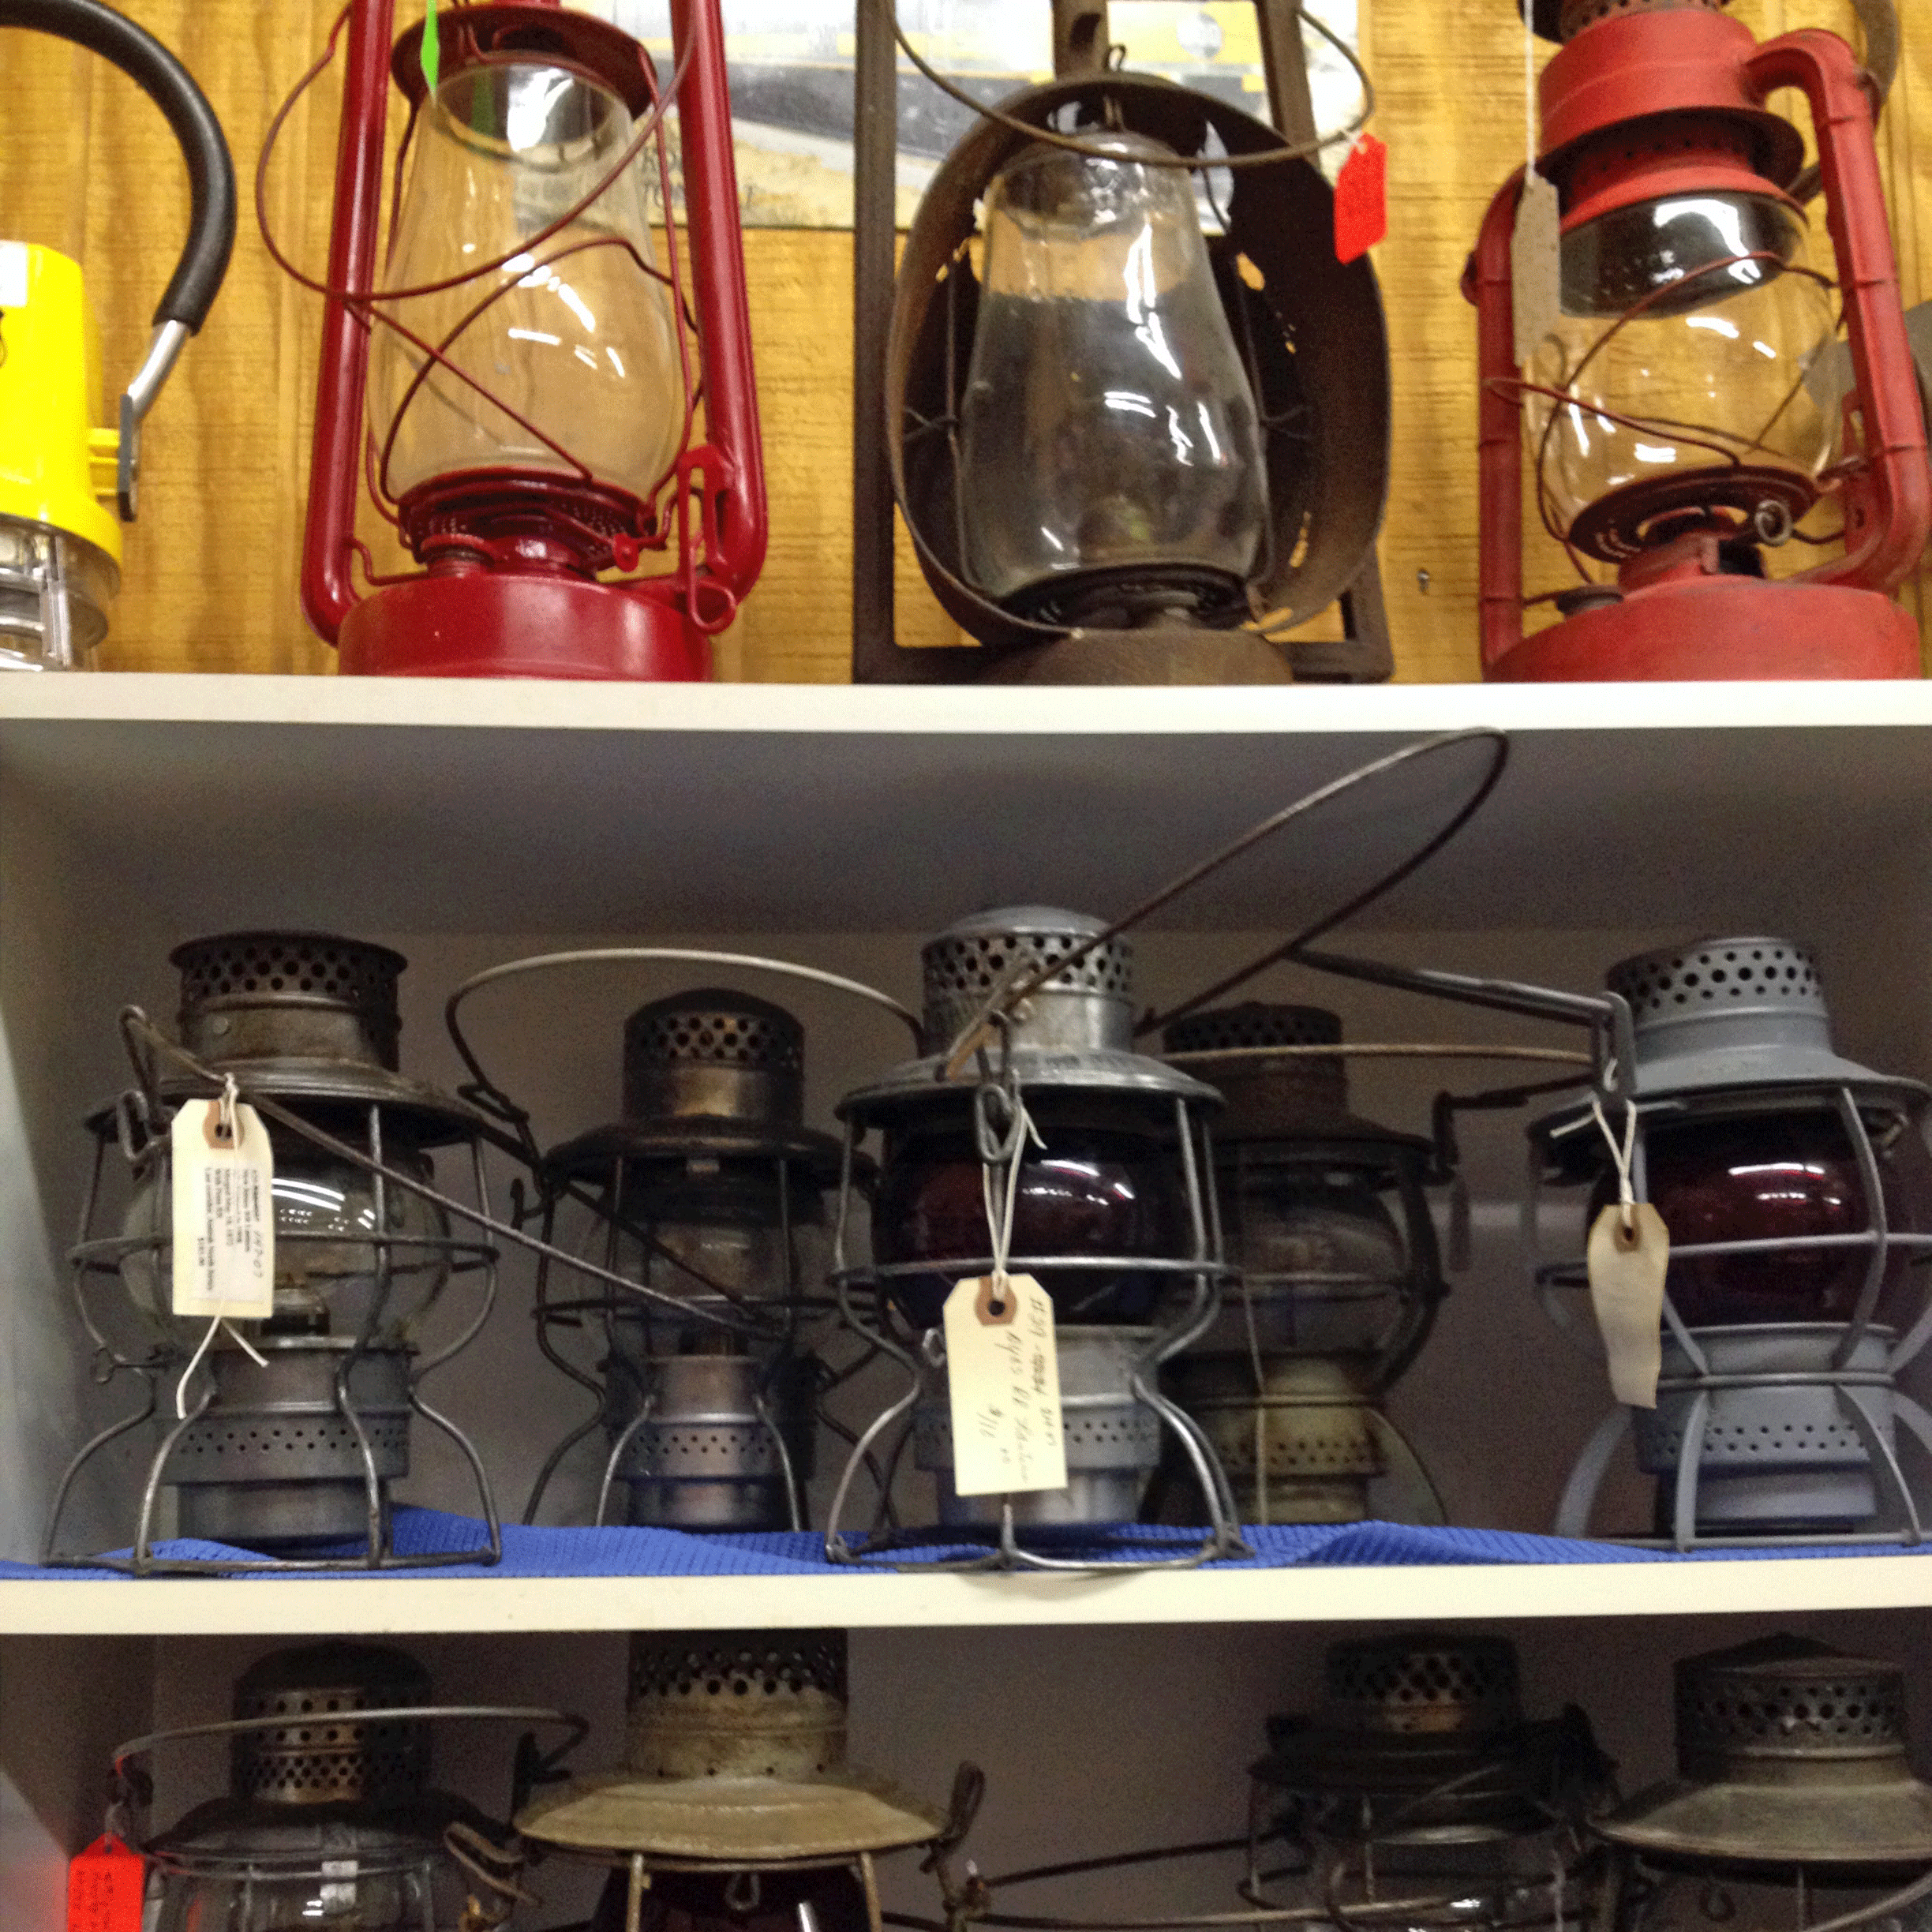 Keep the way lit and the campsite cozy with oil lamps.